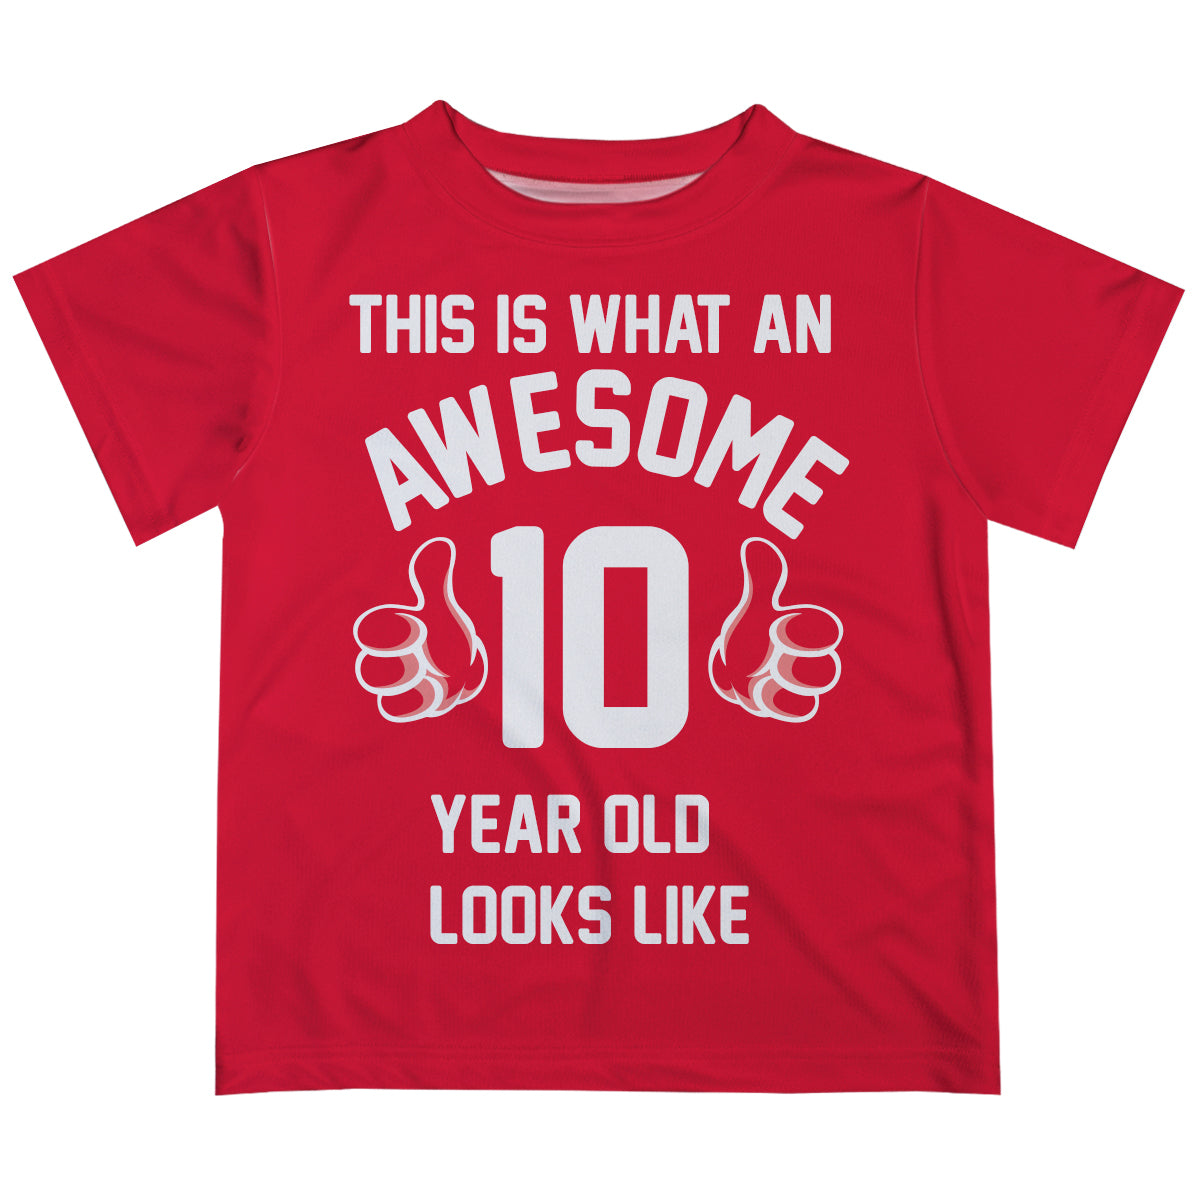 This Is A What A Awesome Your Year Old Looks Like Red Short Sleeve Tee Shirt - Wimziy&Co.